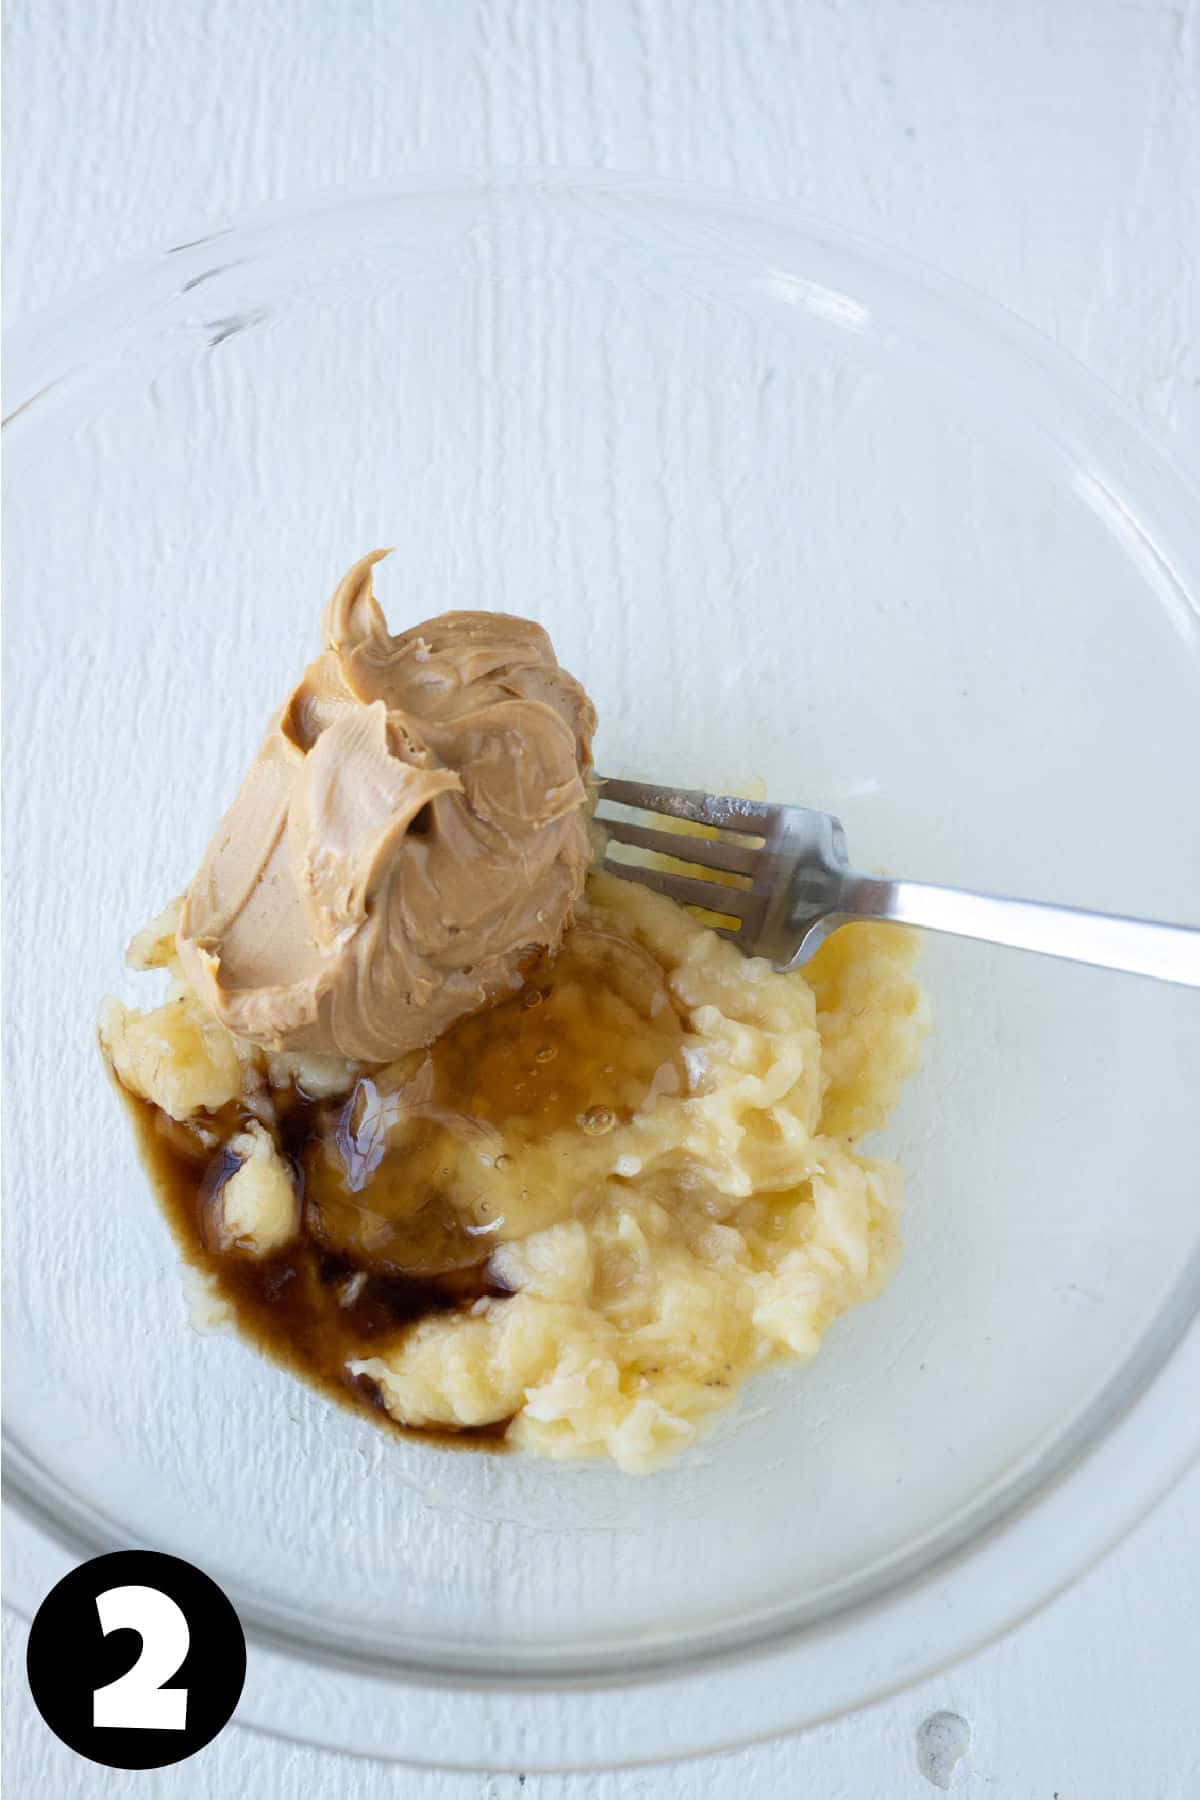 Mashed banana with peanut butter, vanilla, and honey in a mixing bowl.